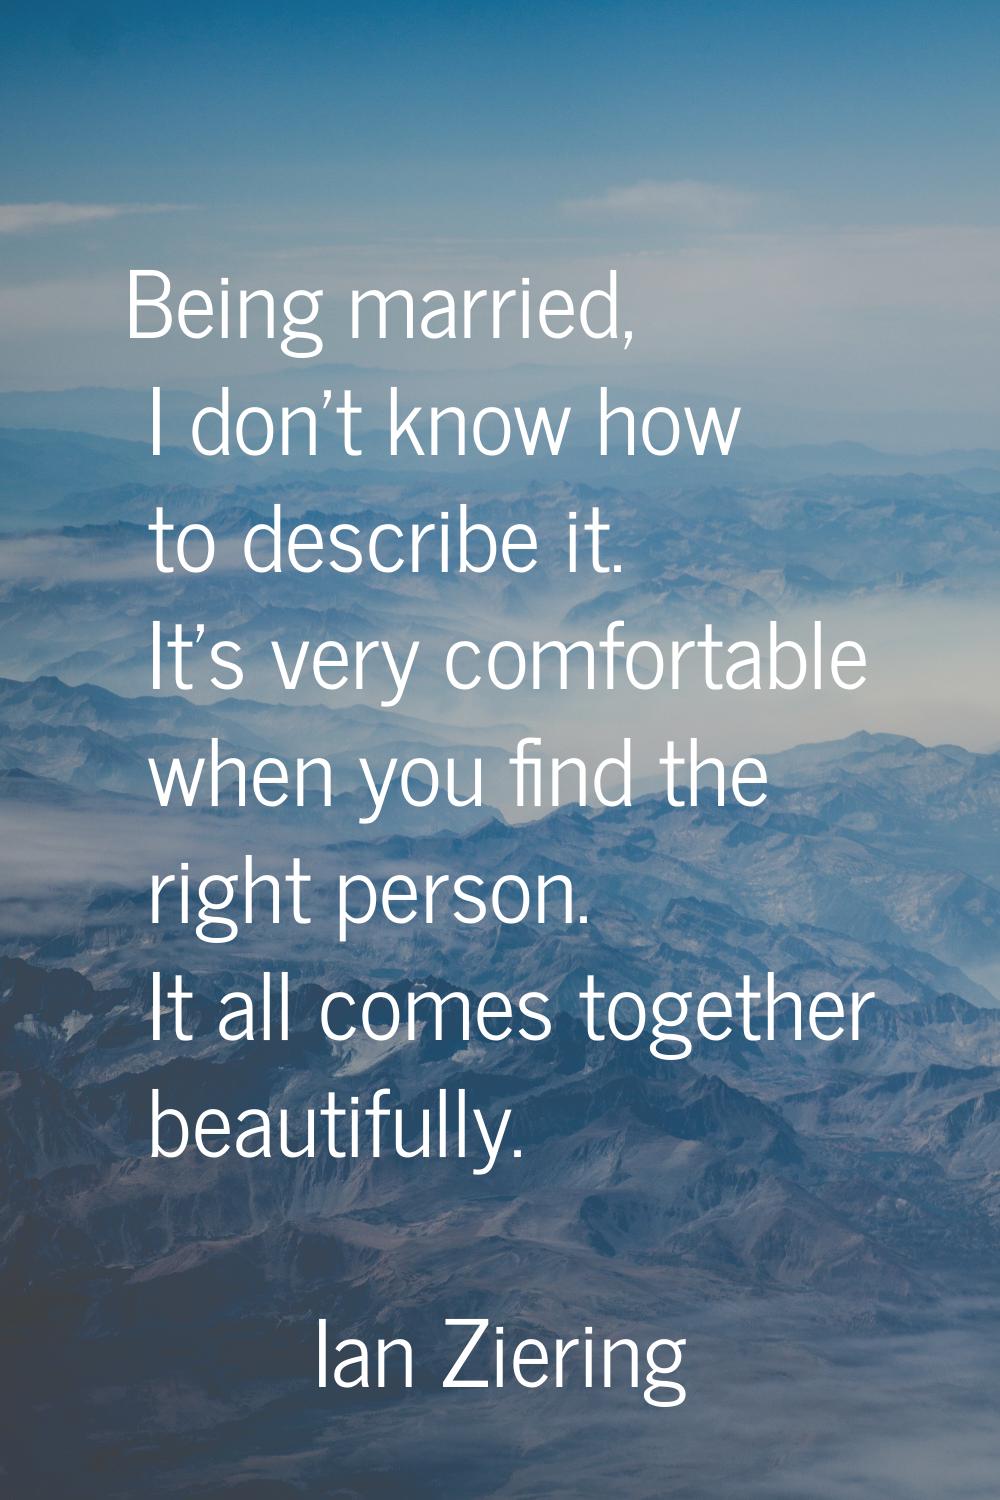 Being married, I don't know how to describe it. It's very comfortable when you find the right perso